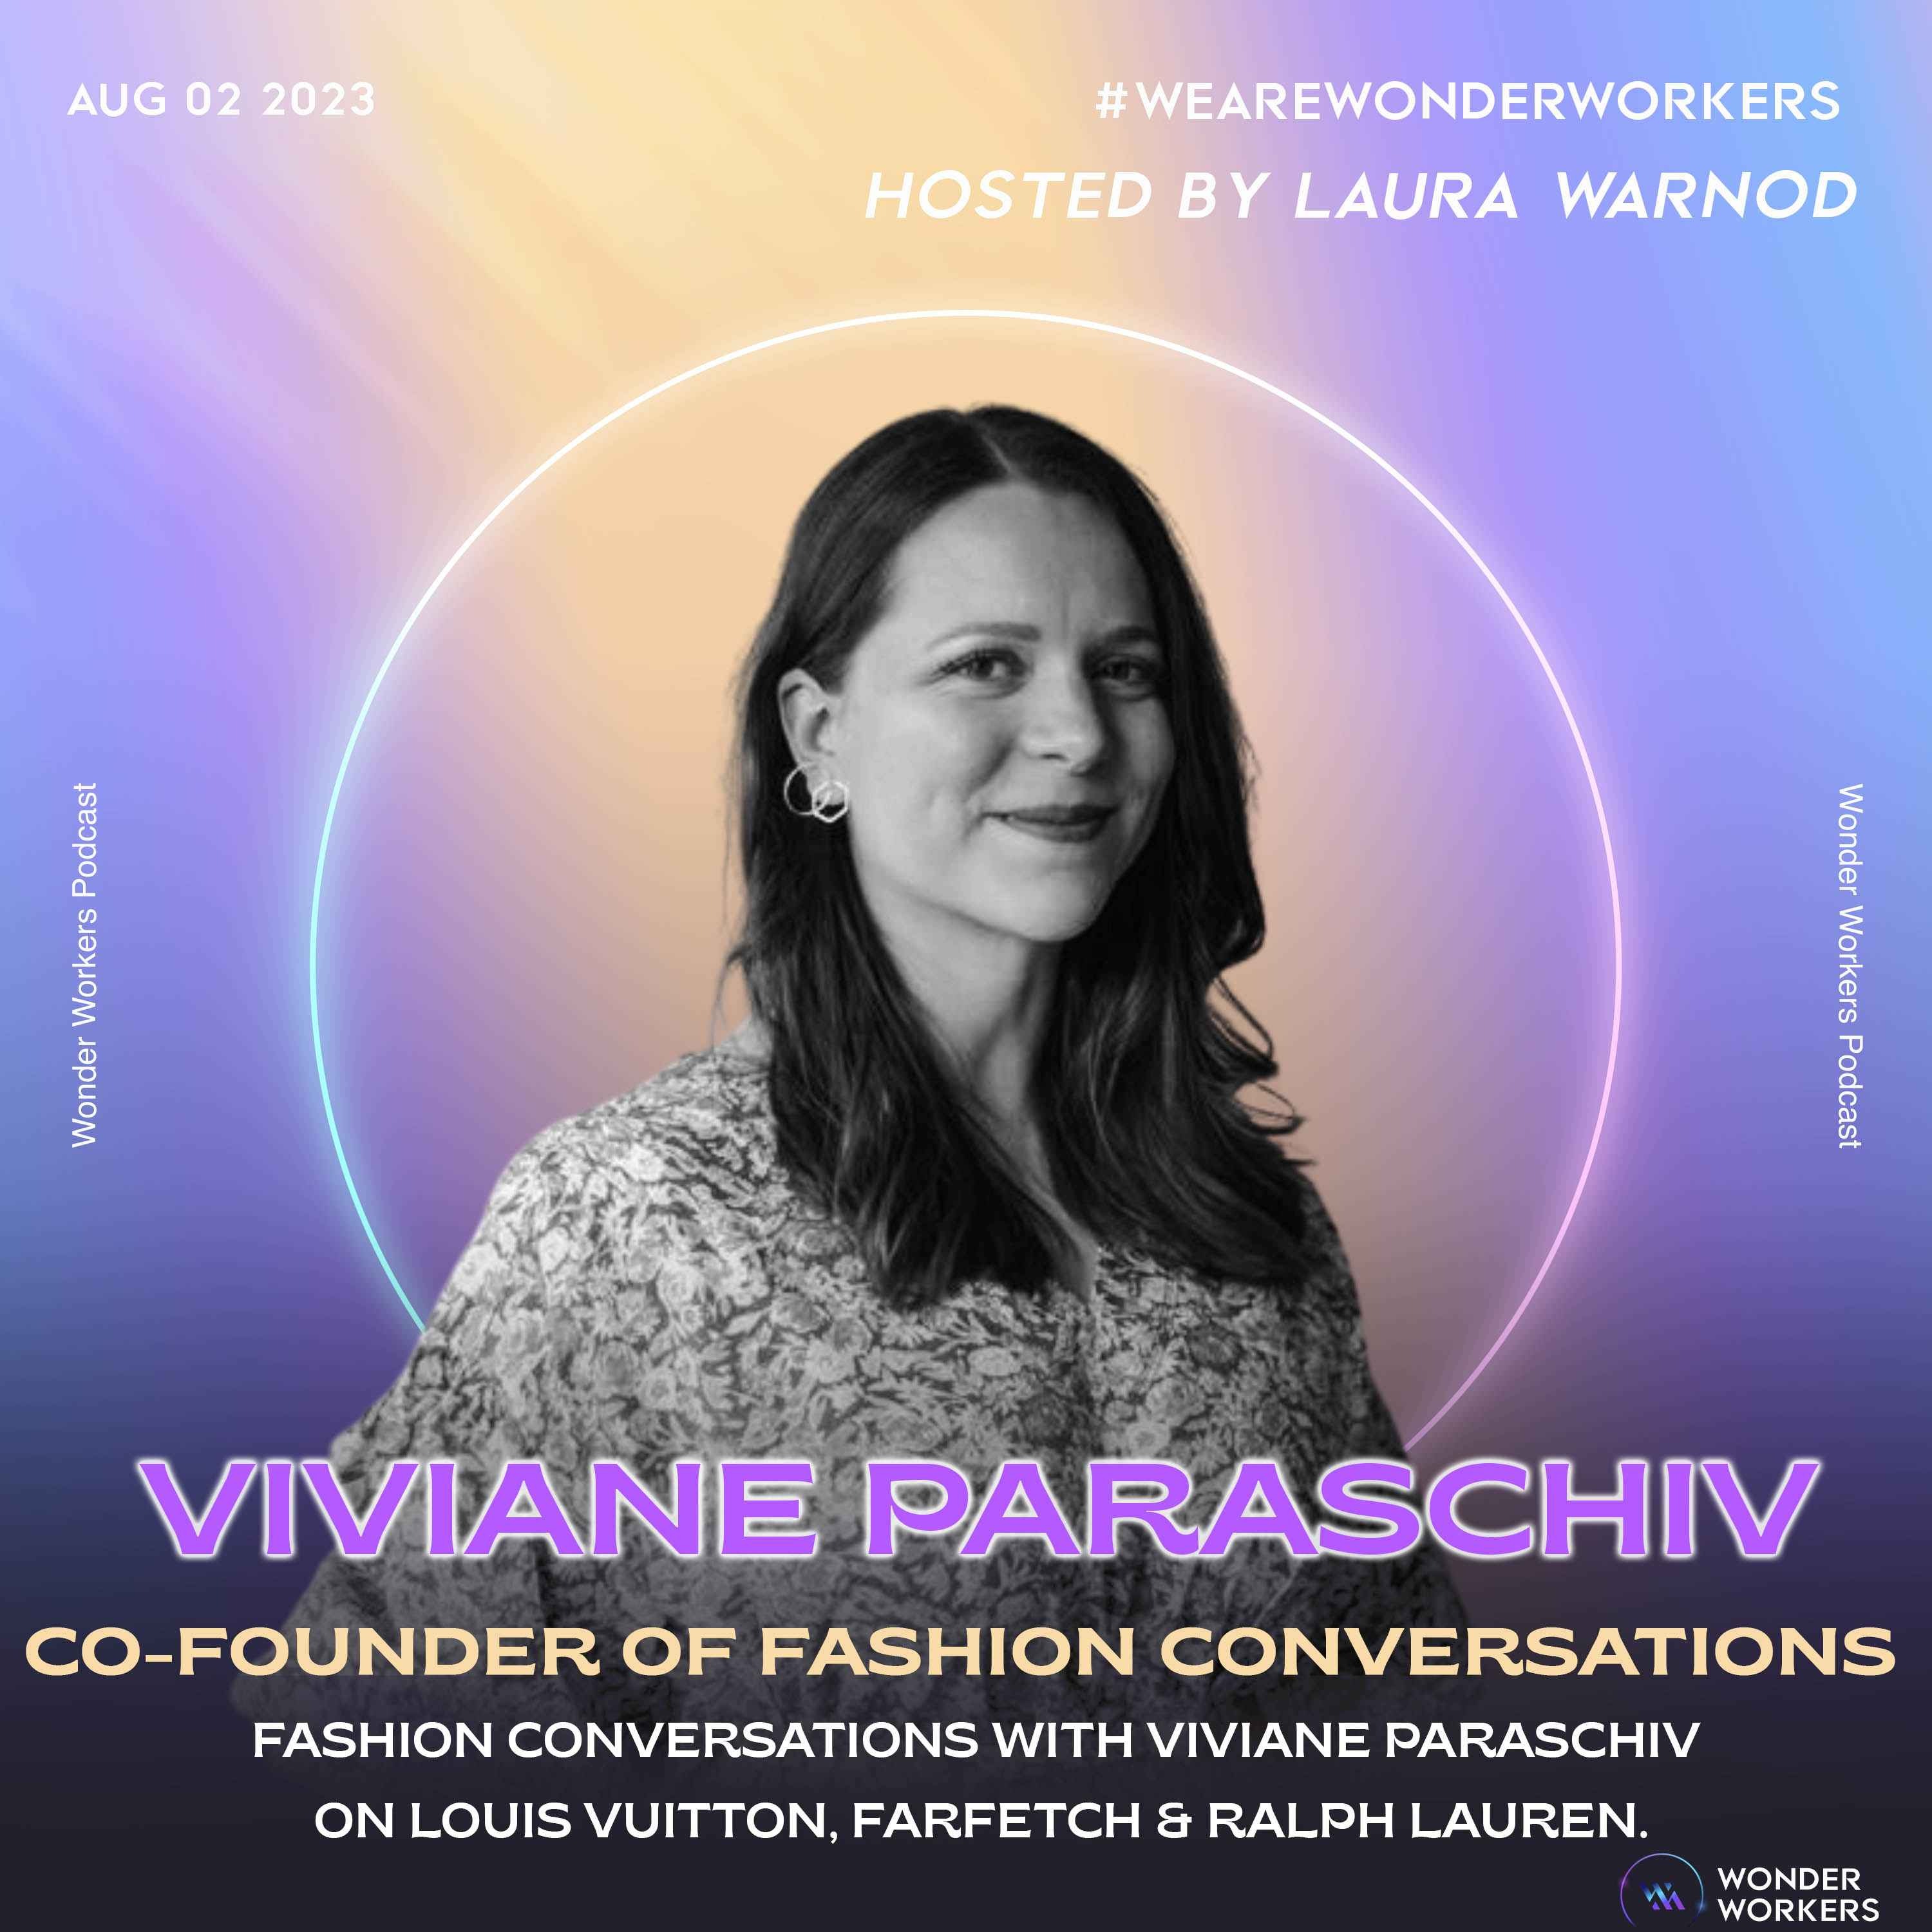 WonderWorkers 11: Viviane Paraschiv, Fashion Conversations - The superpower of creating meaningful connections